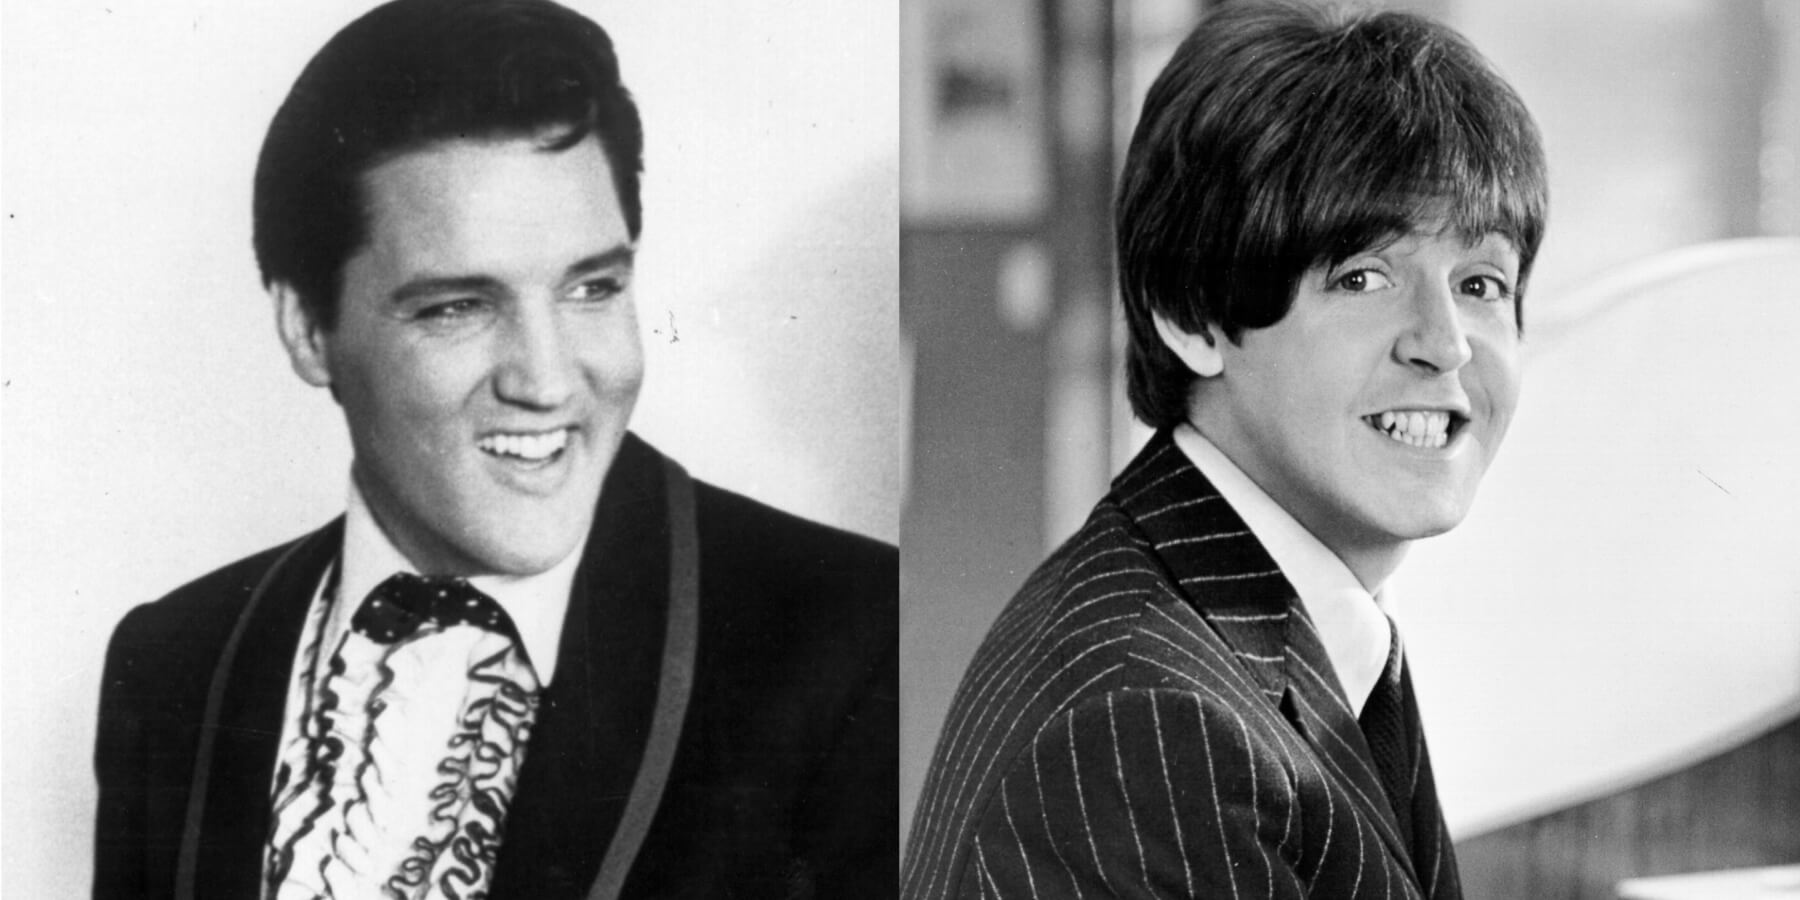 Paul McCartney and Elvis Presley in side-by-side photographs